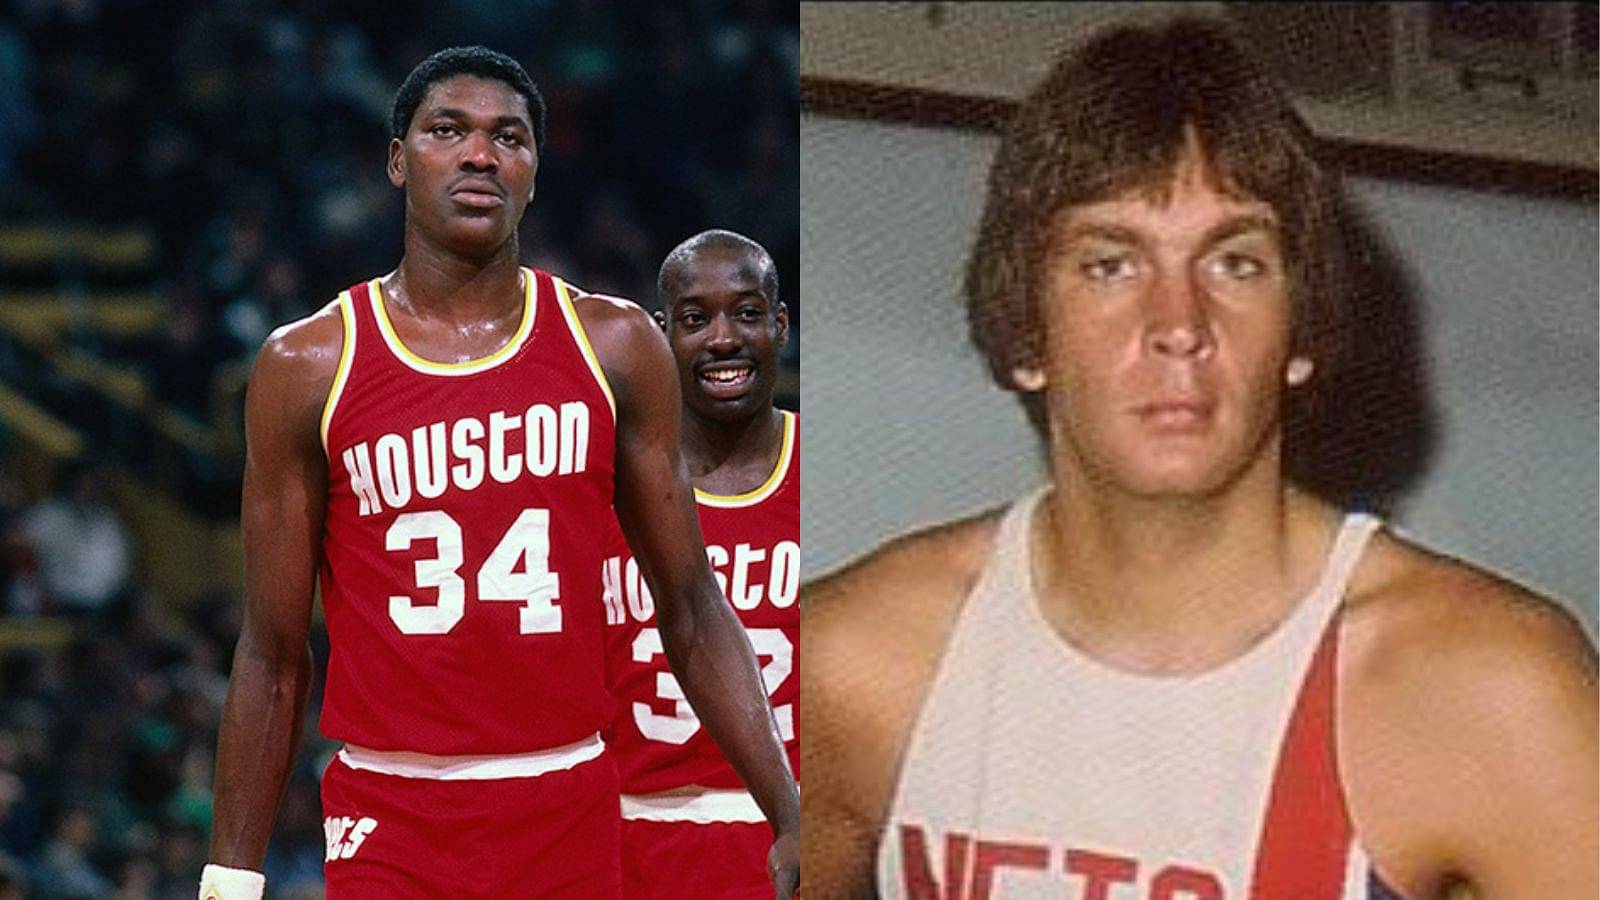 "What did five fingers say to the face?": Hakeem Olajuwon, in his rookie season whopped ‘The Whopper’ Billy Paultz